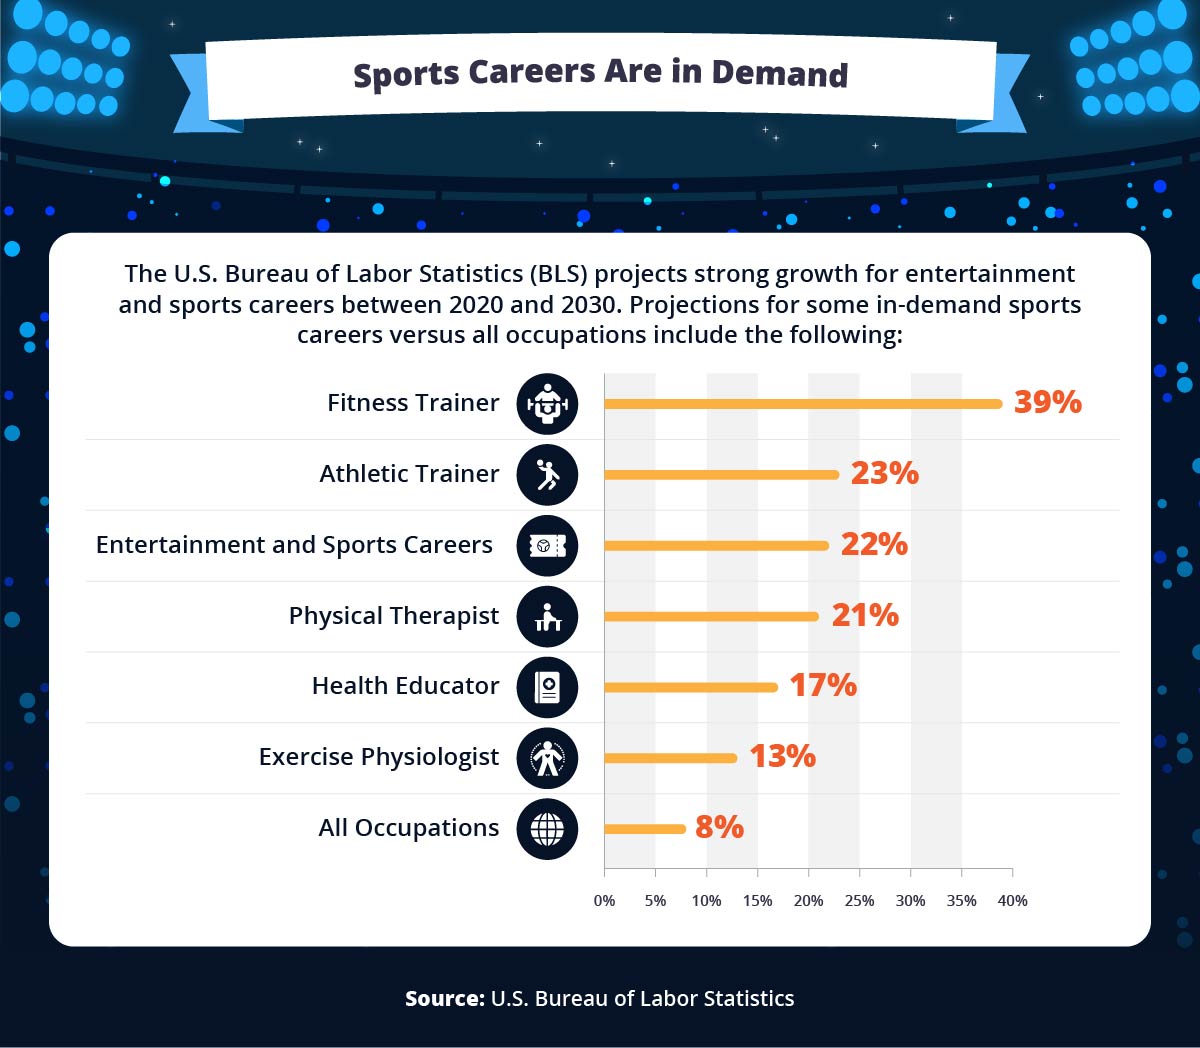 International Sports Management: What Jobs Are Available?